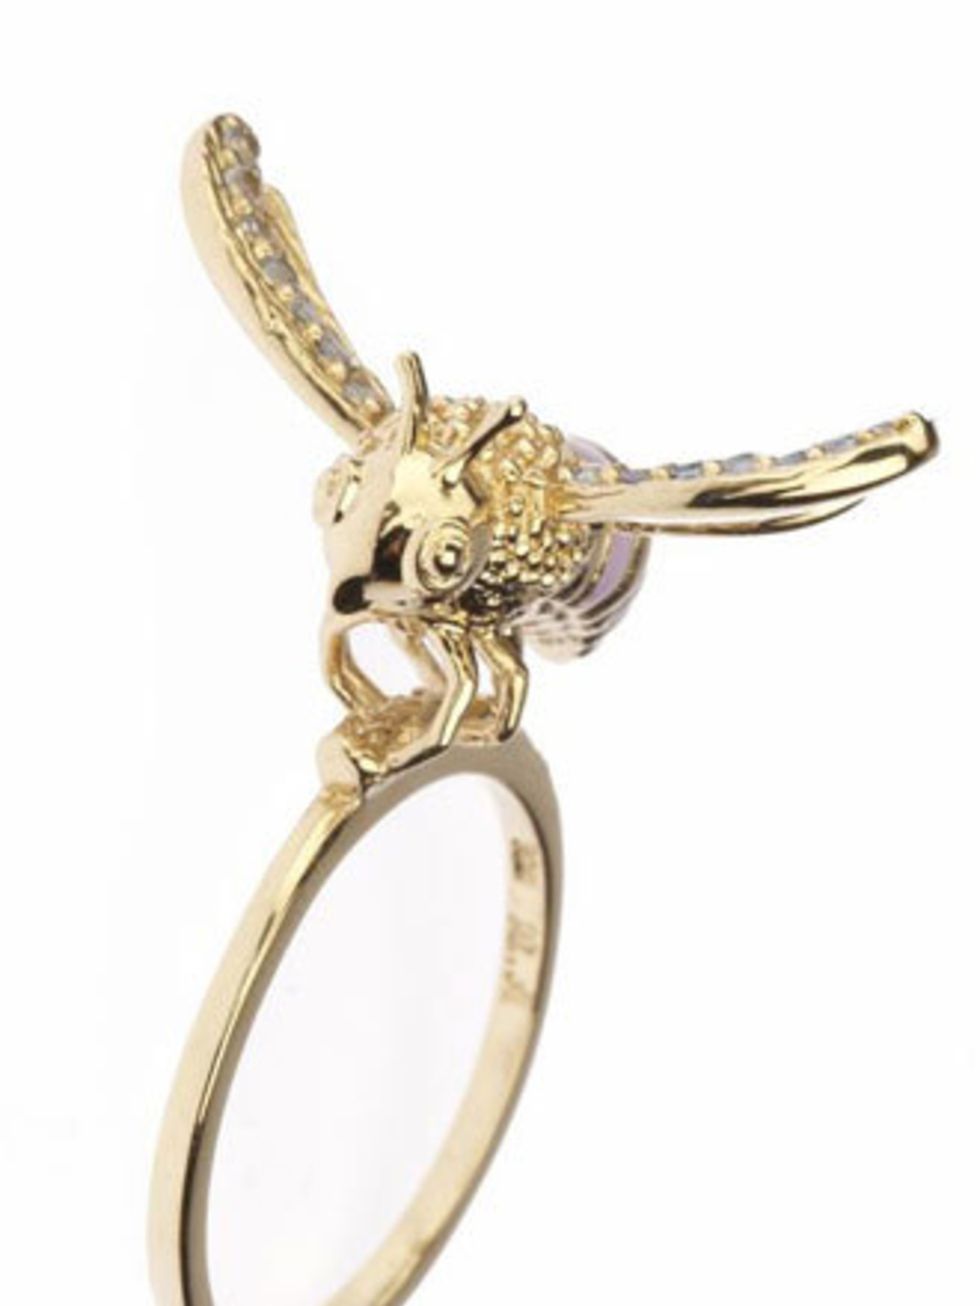 <p>This ring will be a definite talking point. Layer it up with plenty of gold rings and pair with multiple strands of necklaces in the same hue for a <a href="http://www.elleuk.com/starstyle/style-files/%28section%29/nicole-richie">Nicole Richie</a> vibe